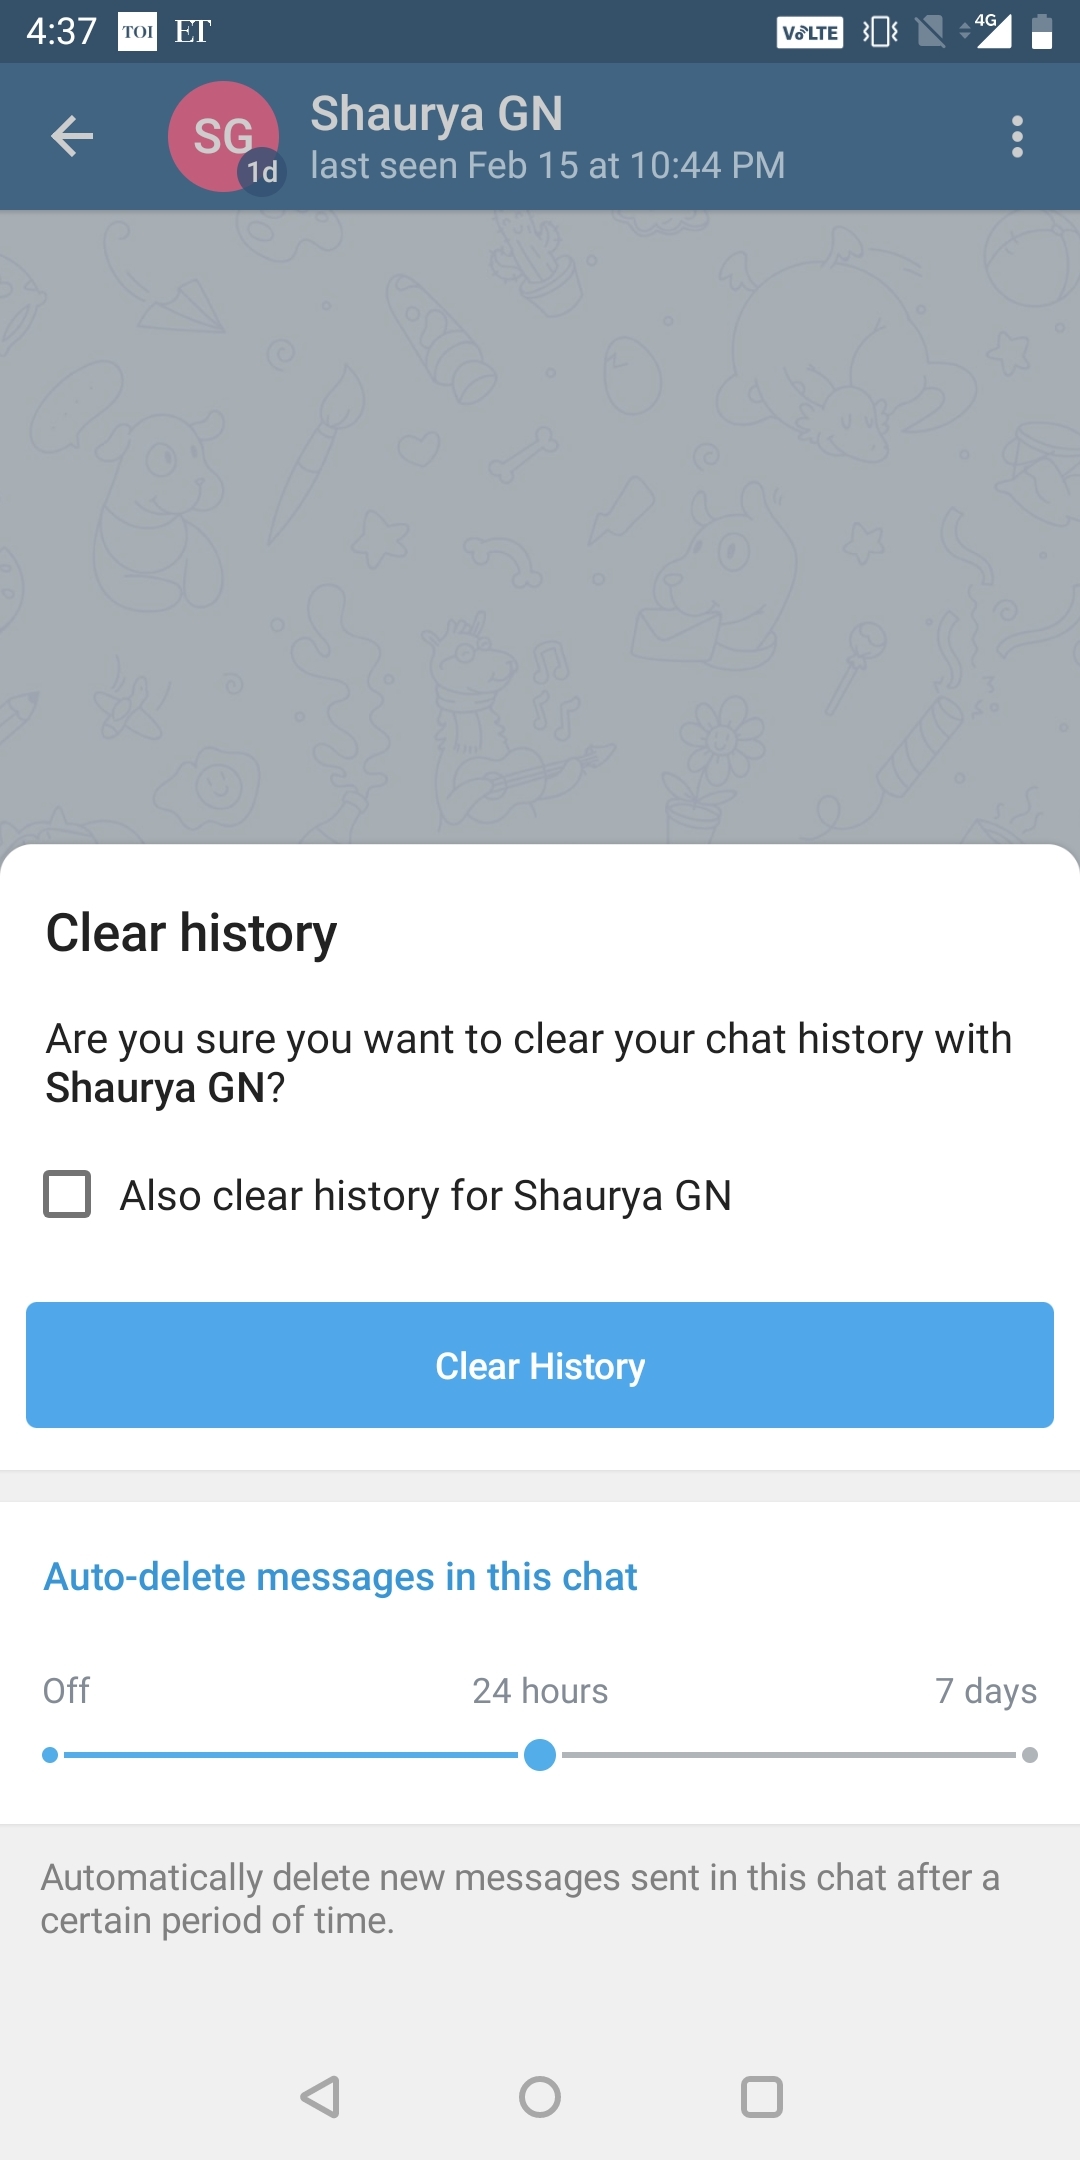 How to enable auto-delete feature on Telegram 3